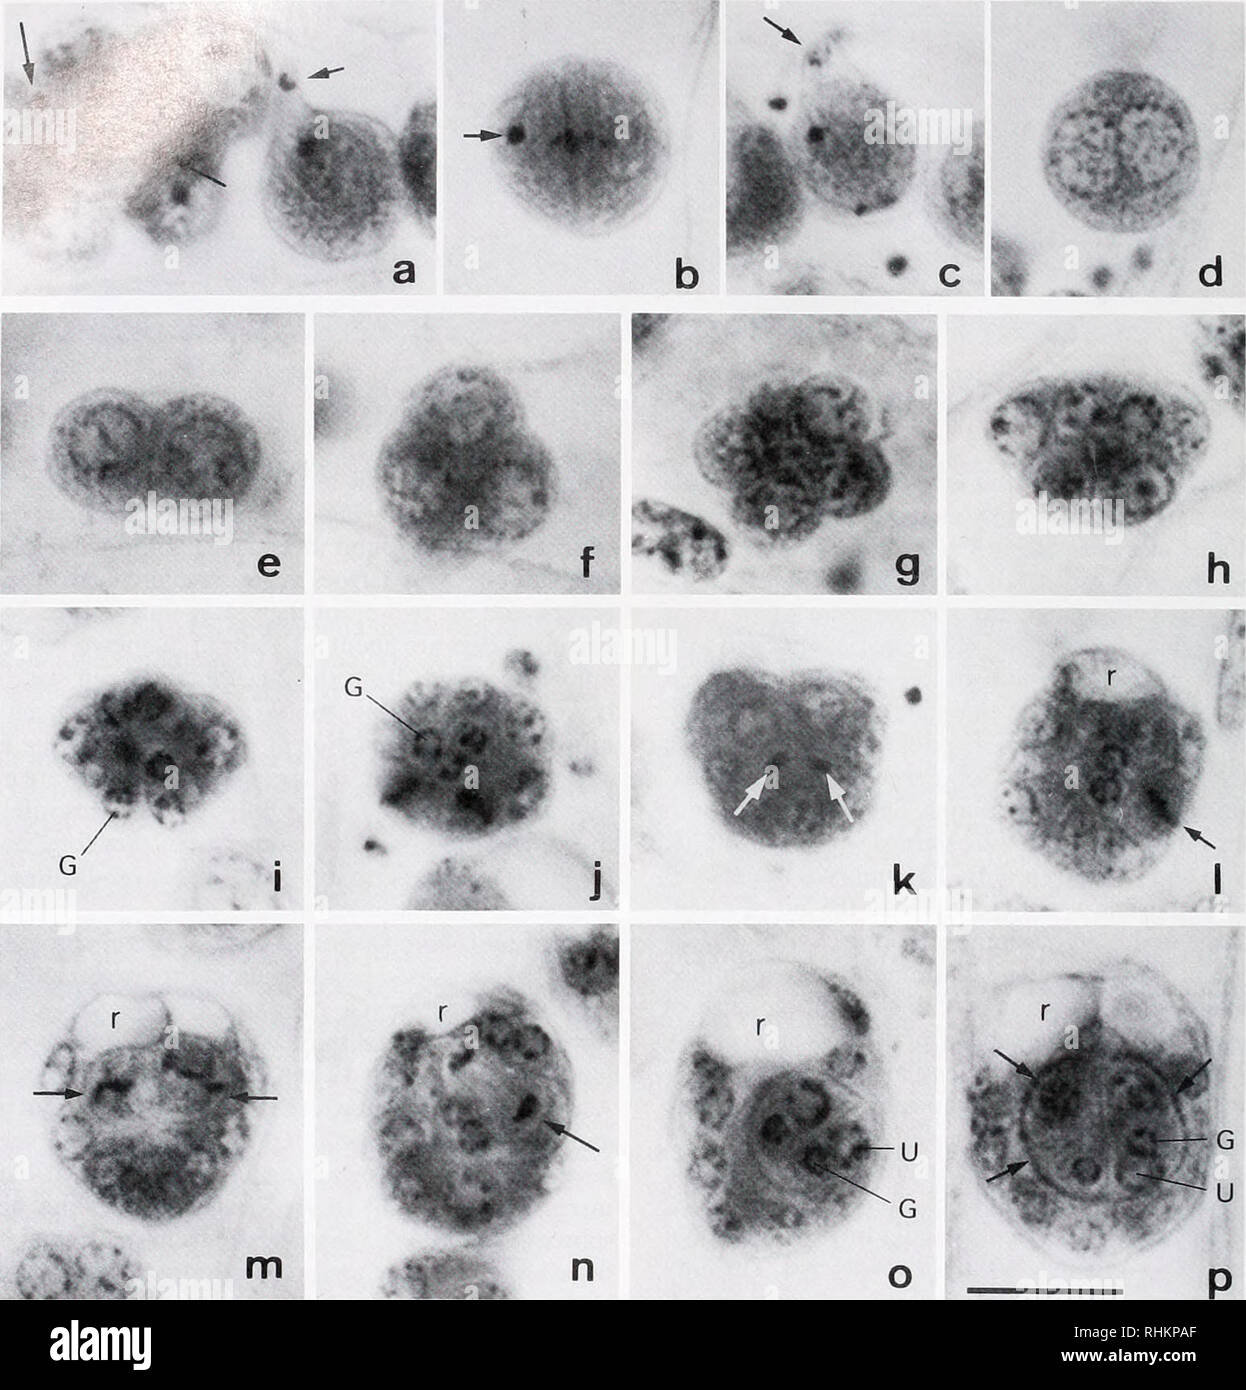 . The Biological bulletin. Biology; Zoology; Biology; Marine Biology. 250 F. HIDETAK.A ET AL. Figure 2. Light micrographs of eggs, developing infusoriform embryos, and fully formed infusoriform embryos otDicyema japonicum. Photomicrographs were taken at magnifications of 2000 diameters under an oil-immersion objective. Scale bar = 1(1 fjm. a. An infusorigen (left) and an oocyte undergoing meiosis (nght). The short arrow indicates the first polar body and the long arrows indicate spermatozoa, b. An oocyte undergoing the second meiotic division. The arrow indicates a spermatozoon, c. An oocyte f Stock Photo